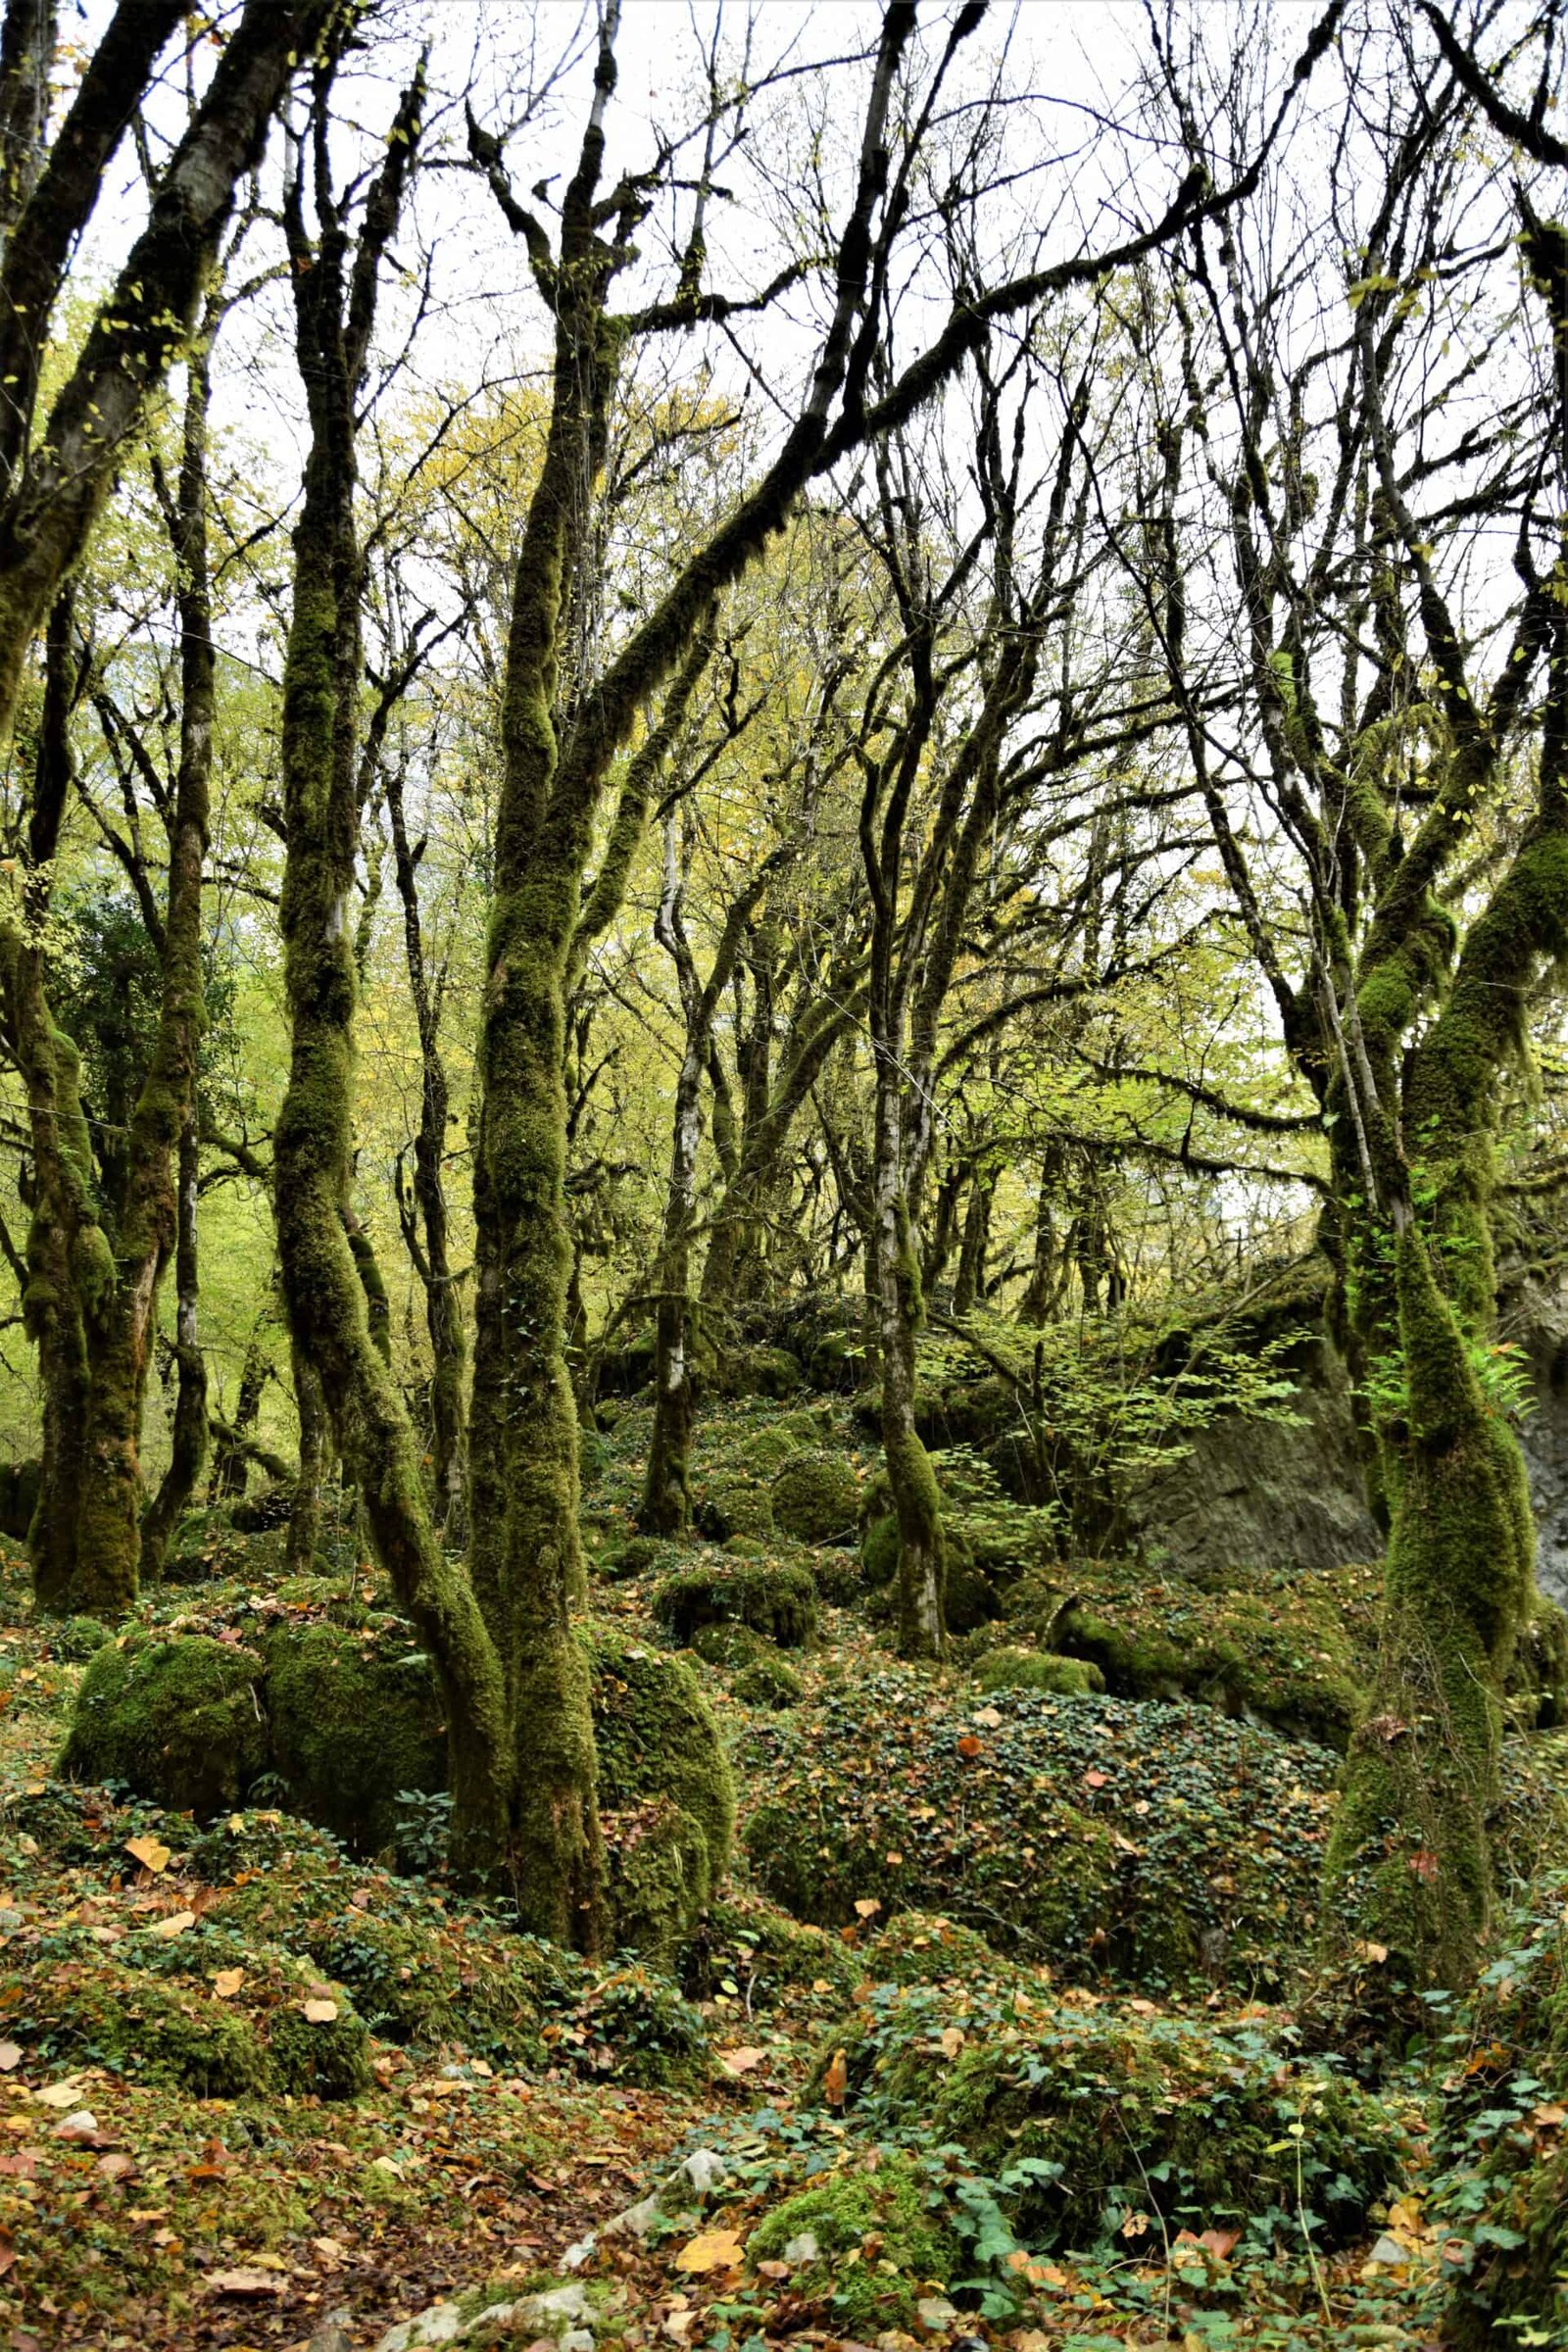 moss-covered rocks and forest floor overgrown by ivy surround trees entirely covered in verdant moss